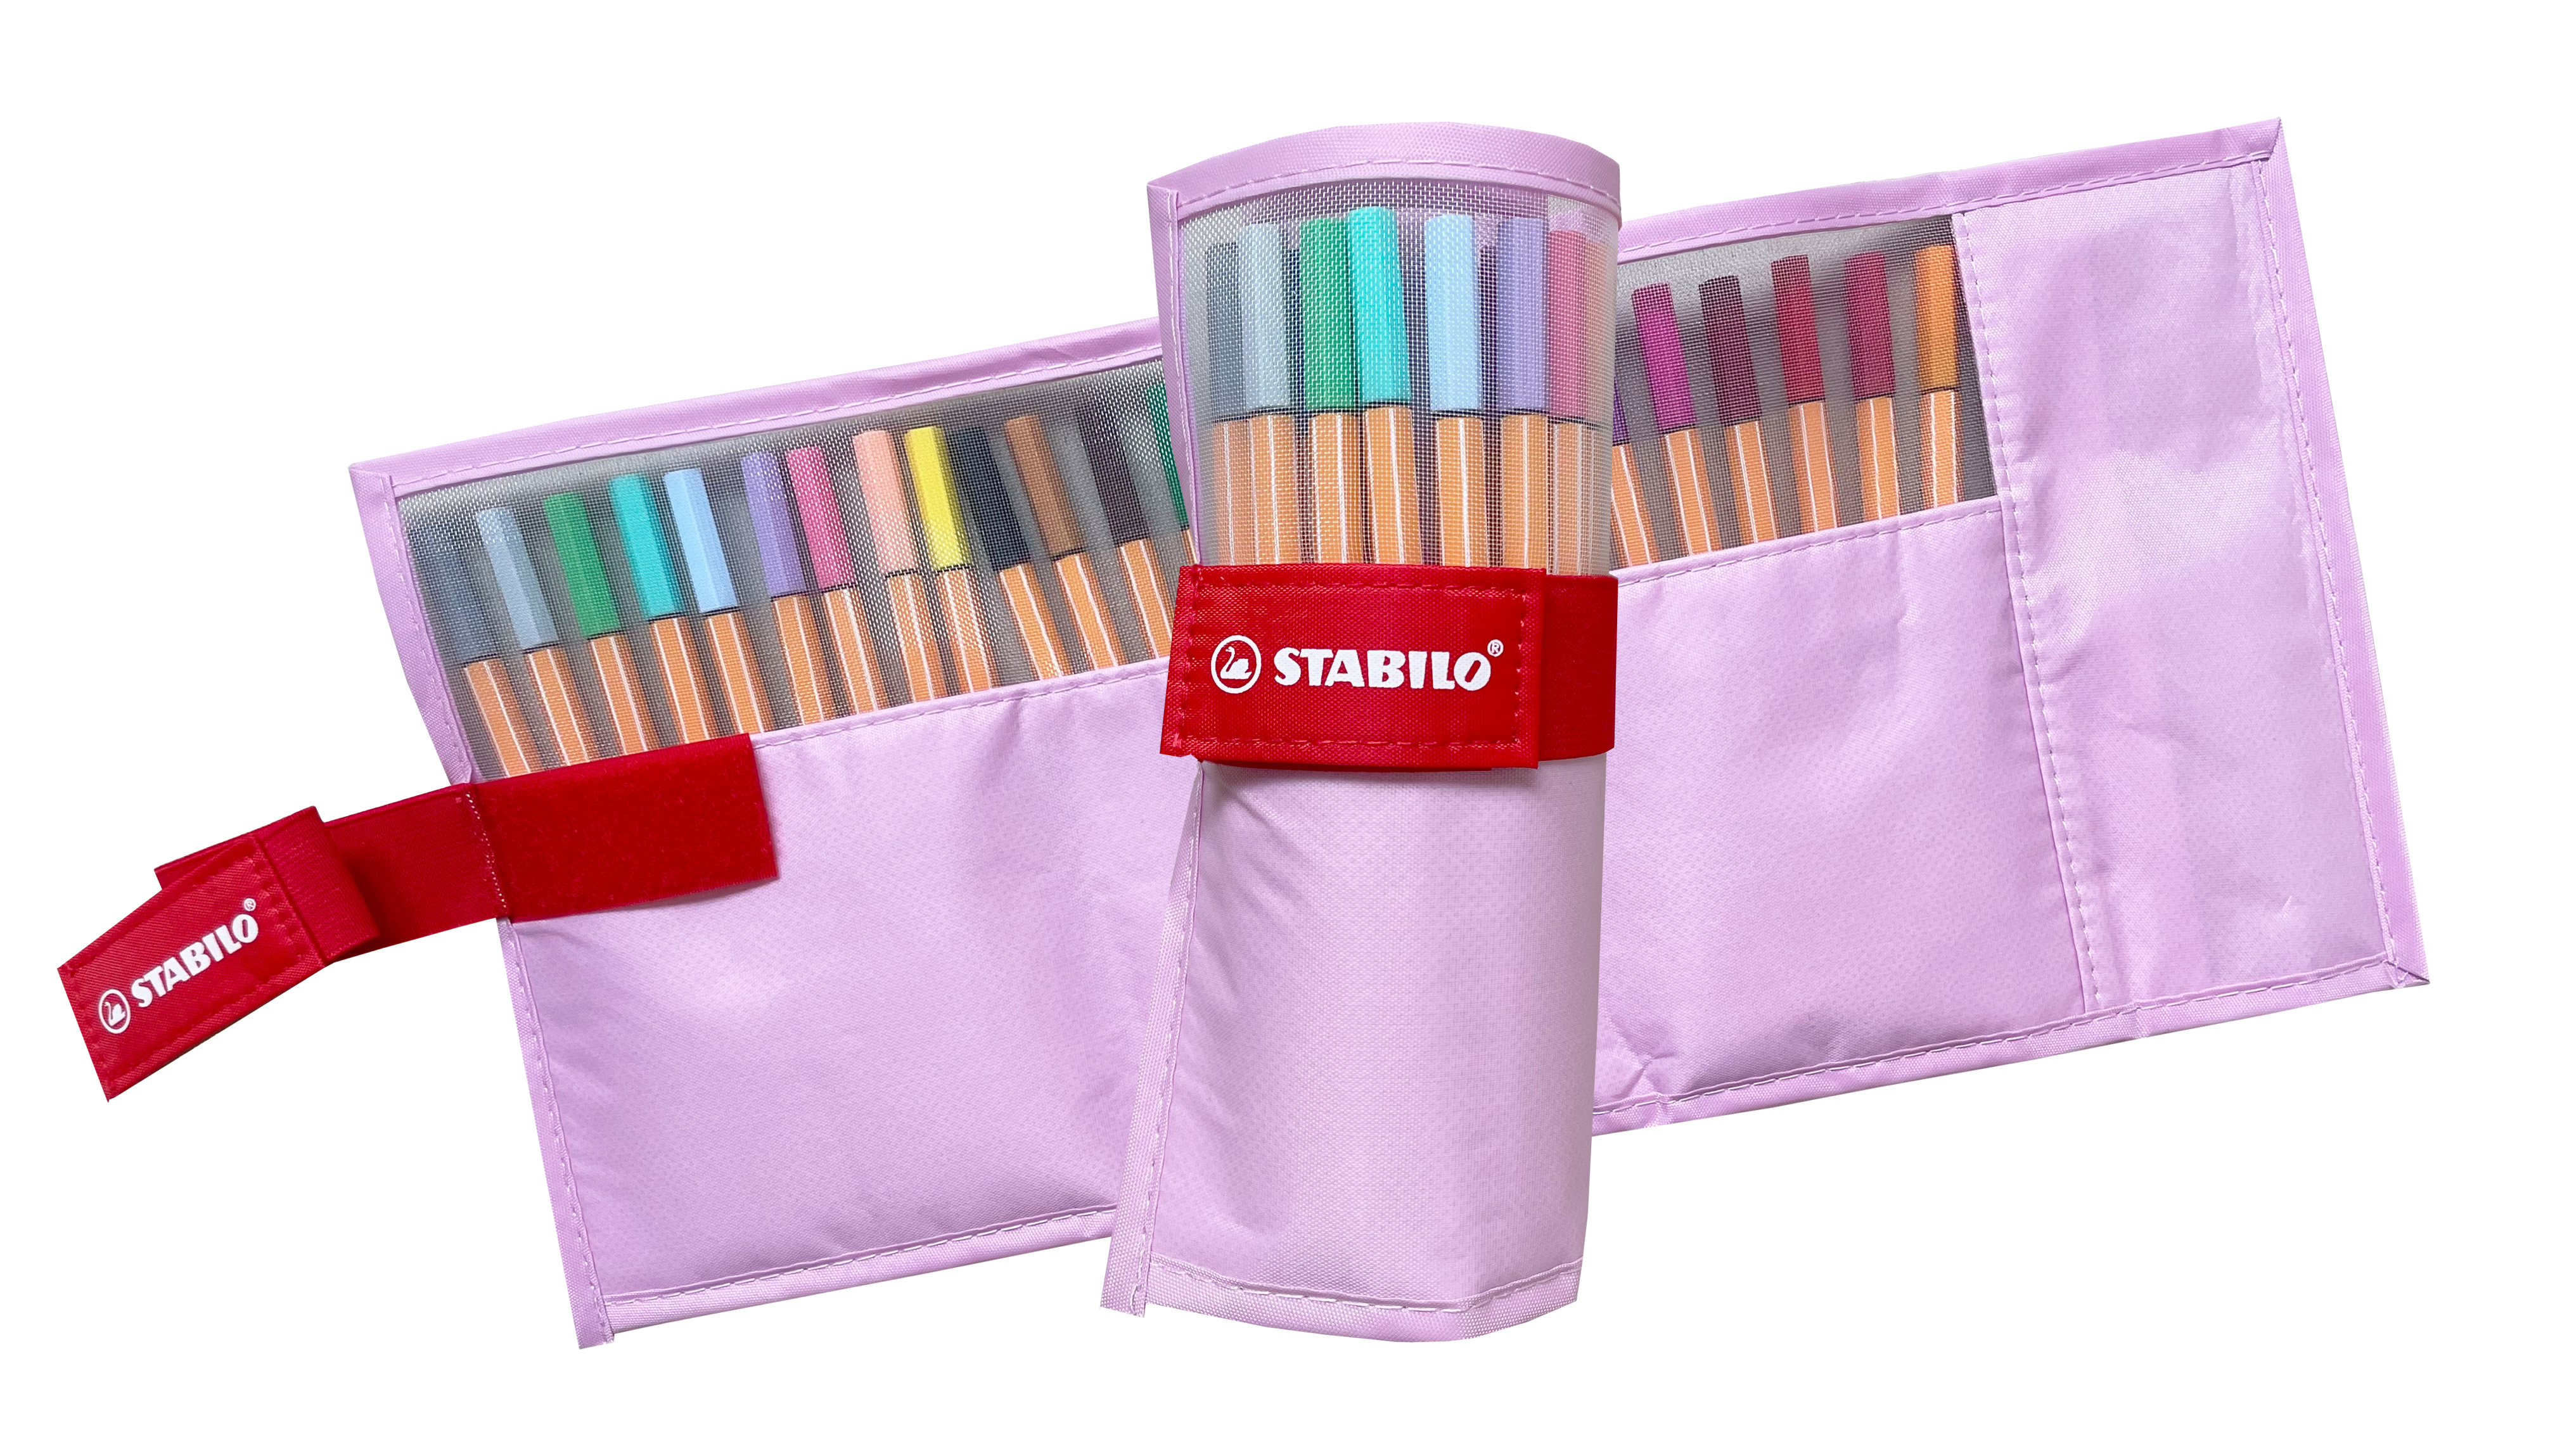 STABILO Rollerset point 88 0.4mm 8825-08-04CH 25 couleurs ass. rose pastel